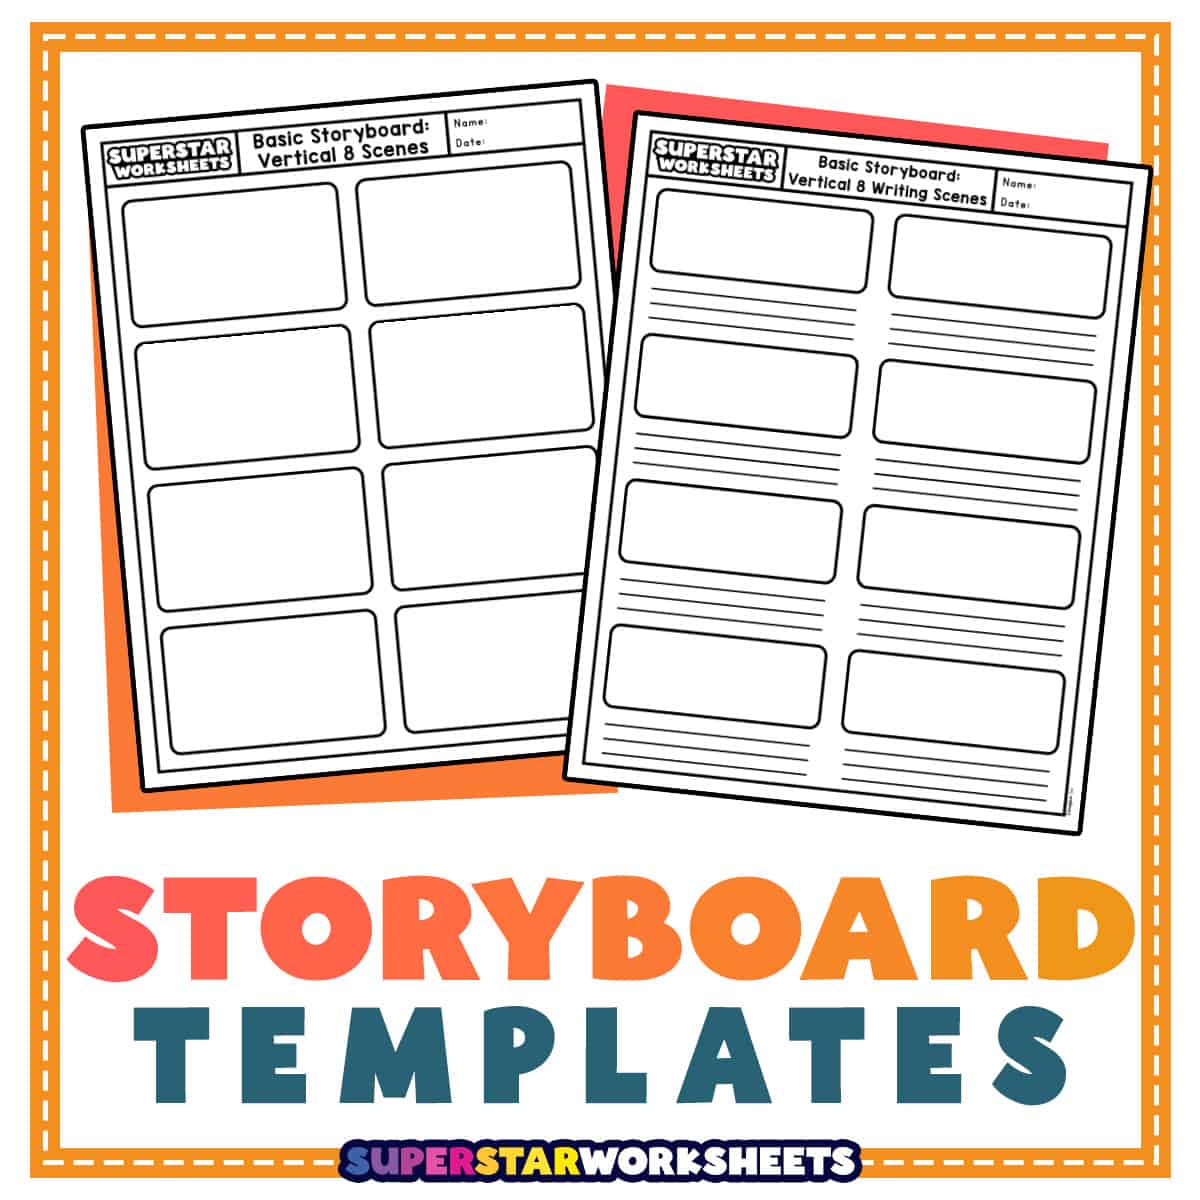 blank board game template Storyboard by poster-templates